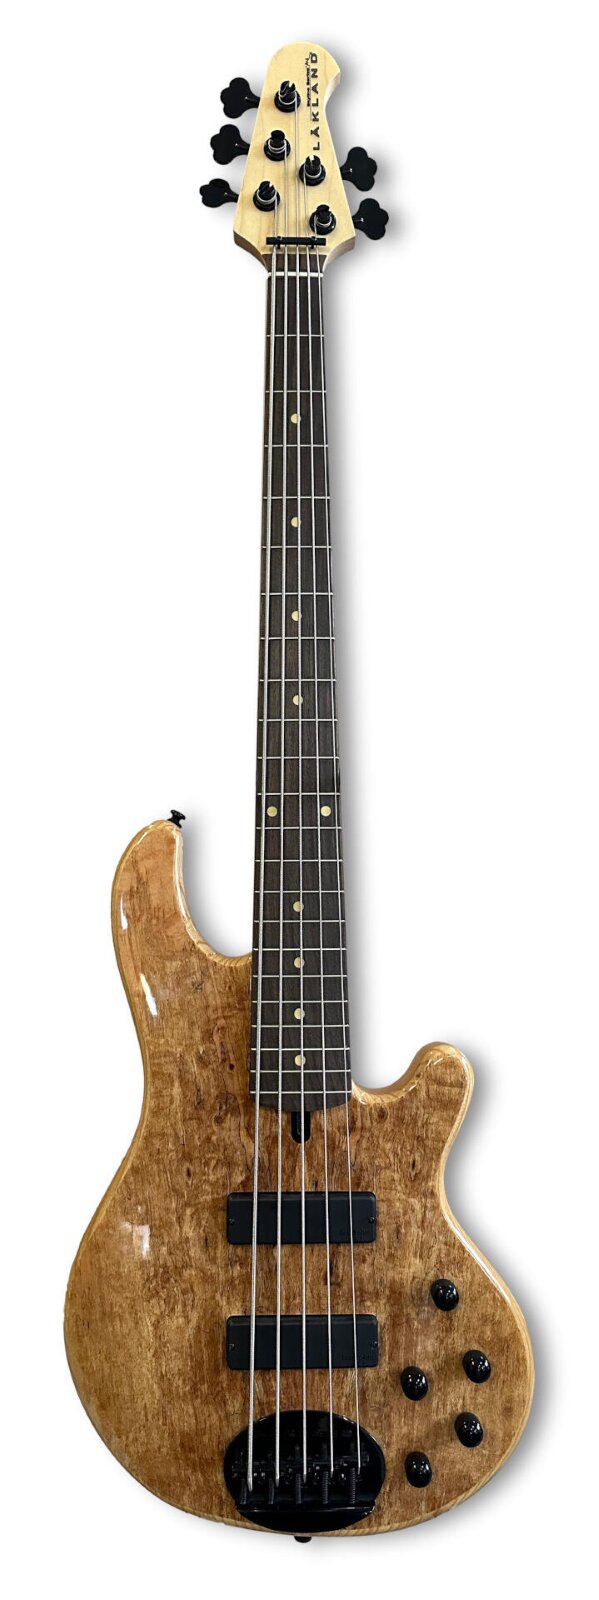 LAKLAND Skyline 55-01 Deluxe Bass, 5-Saiter - Spalted Maple Top, Natural Gloss : photo 1